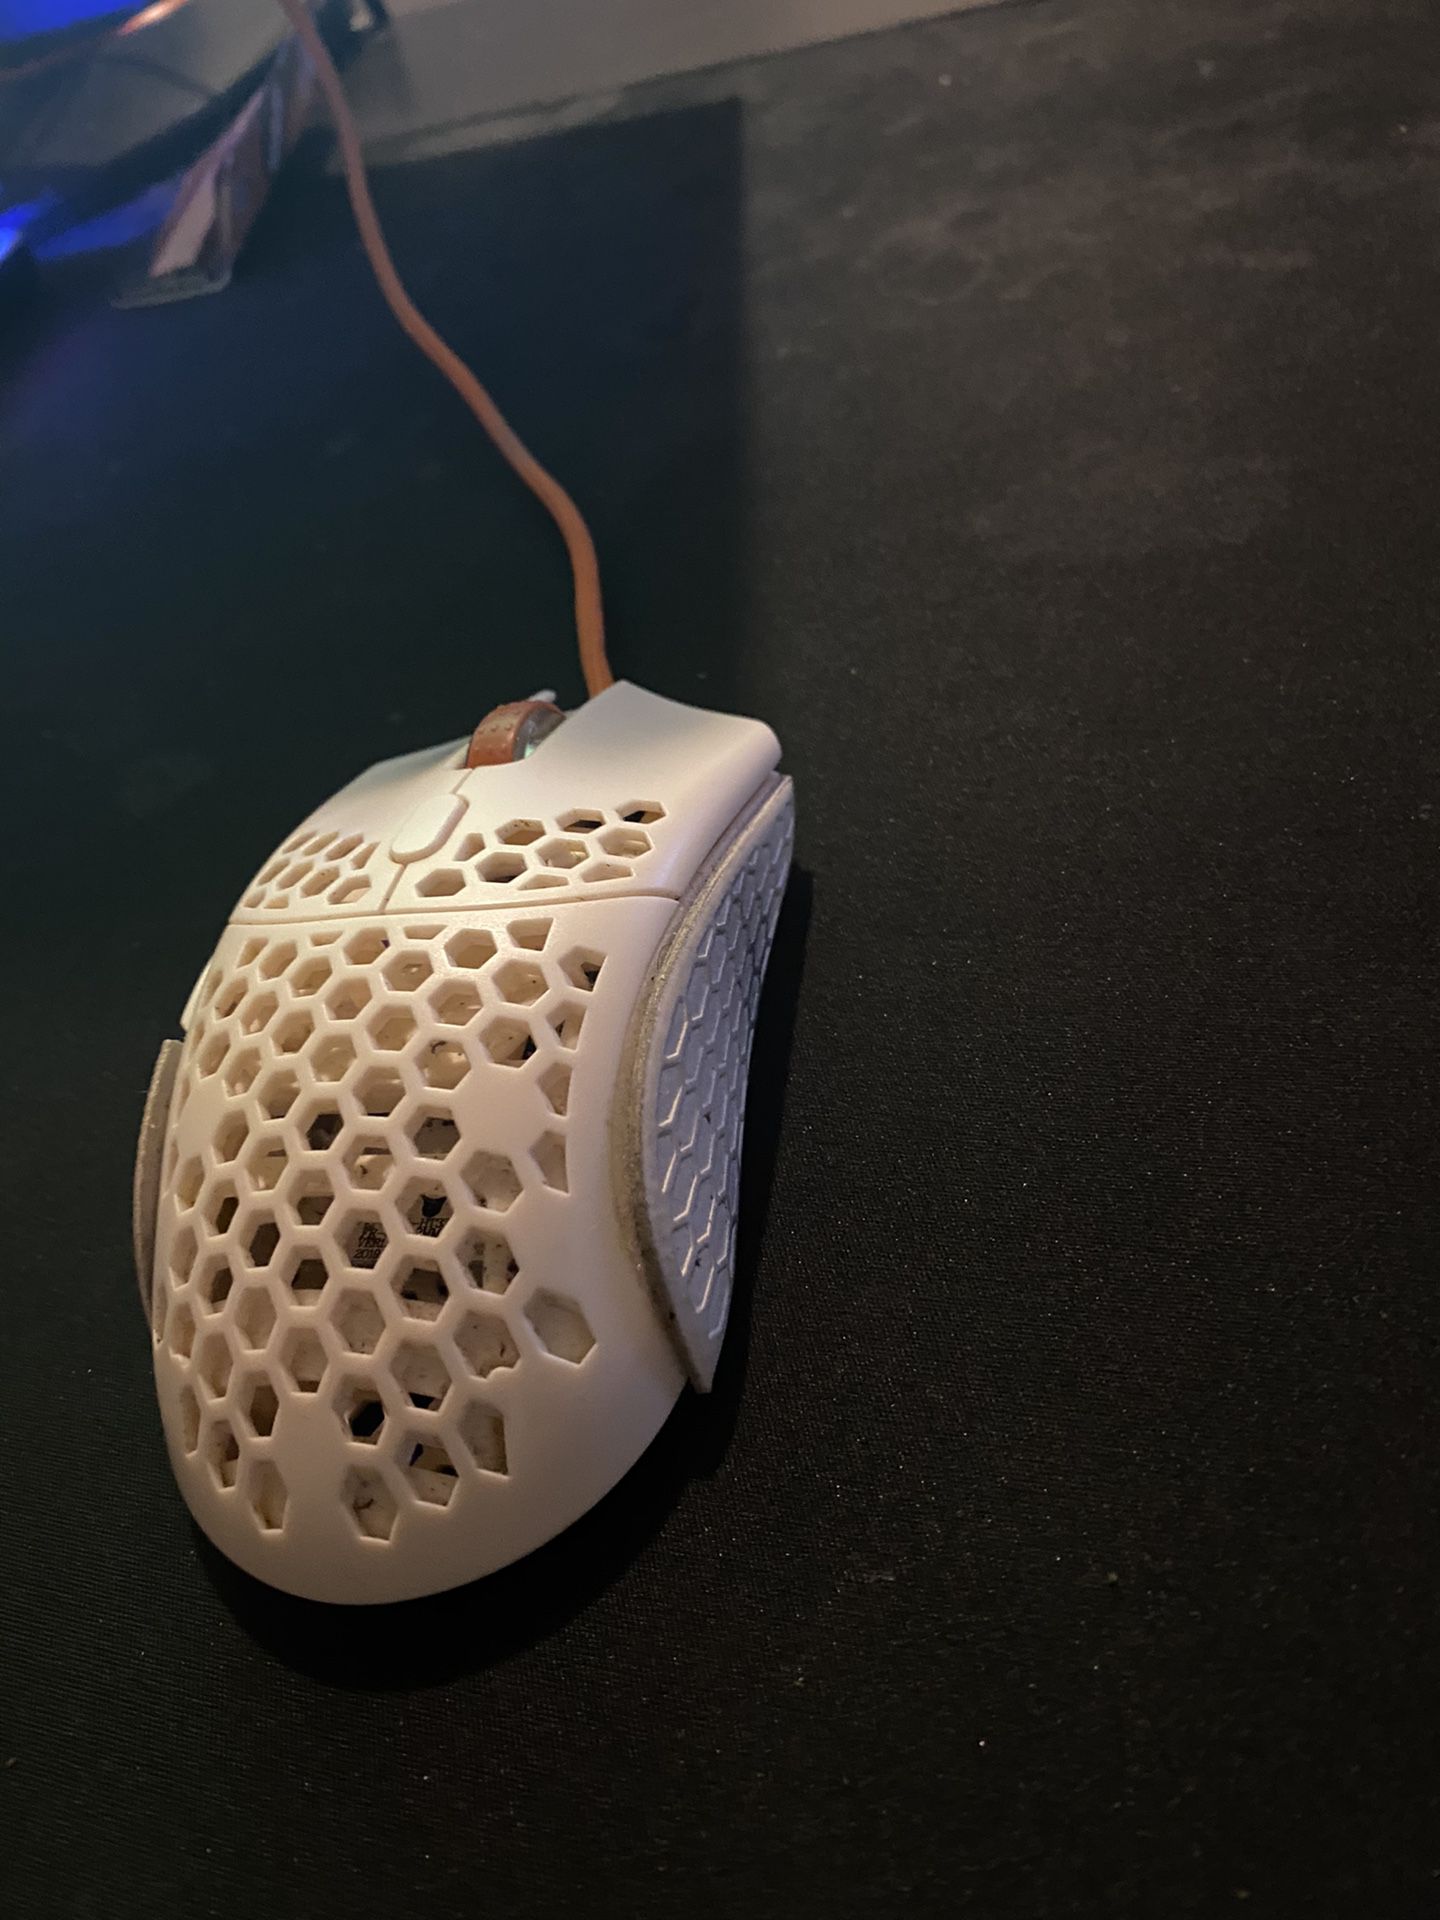 Finalmouse UL2 (used)